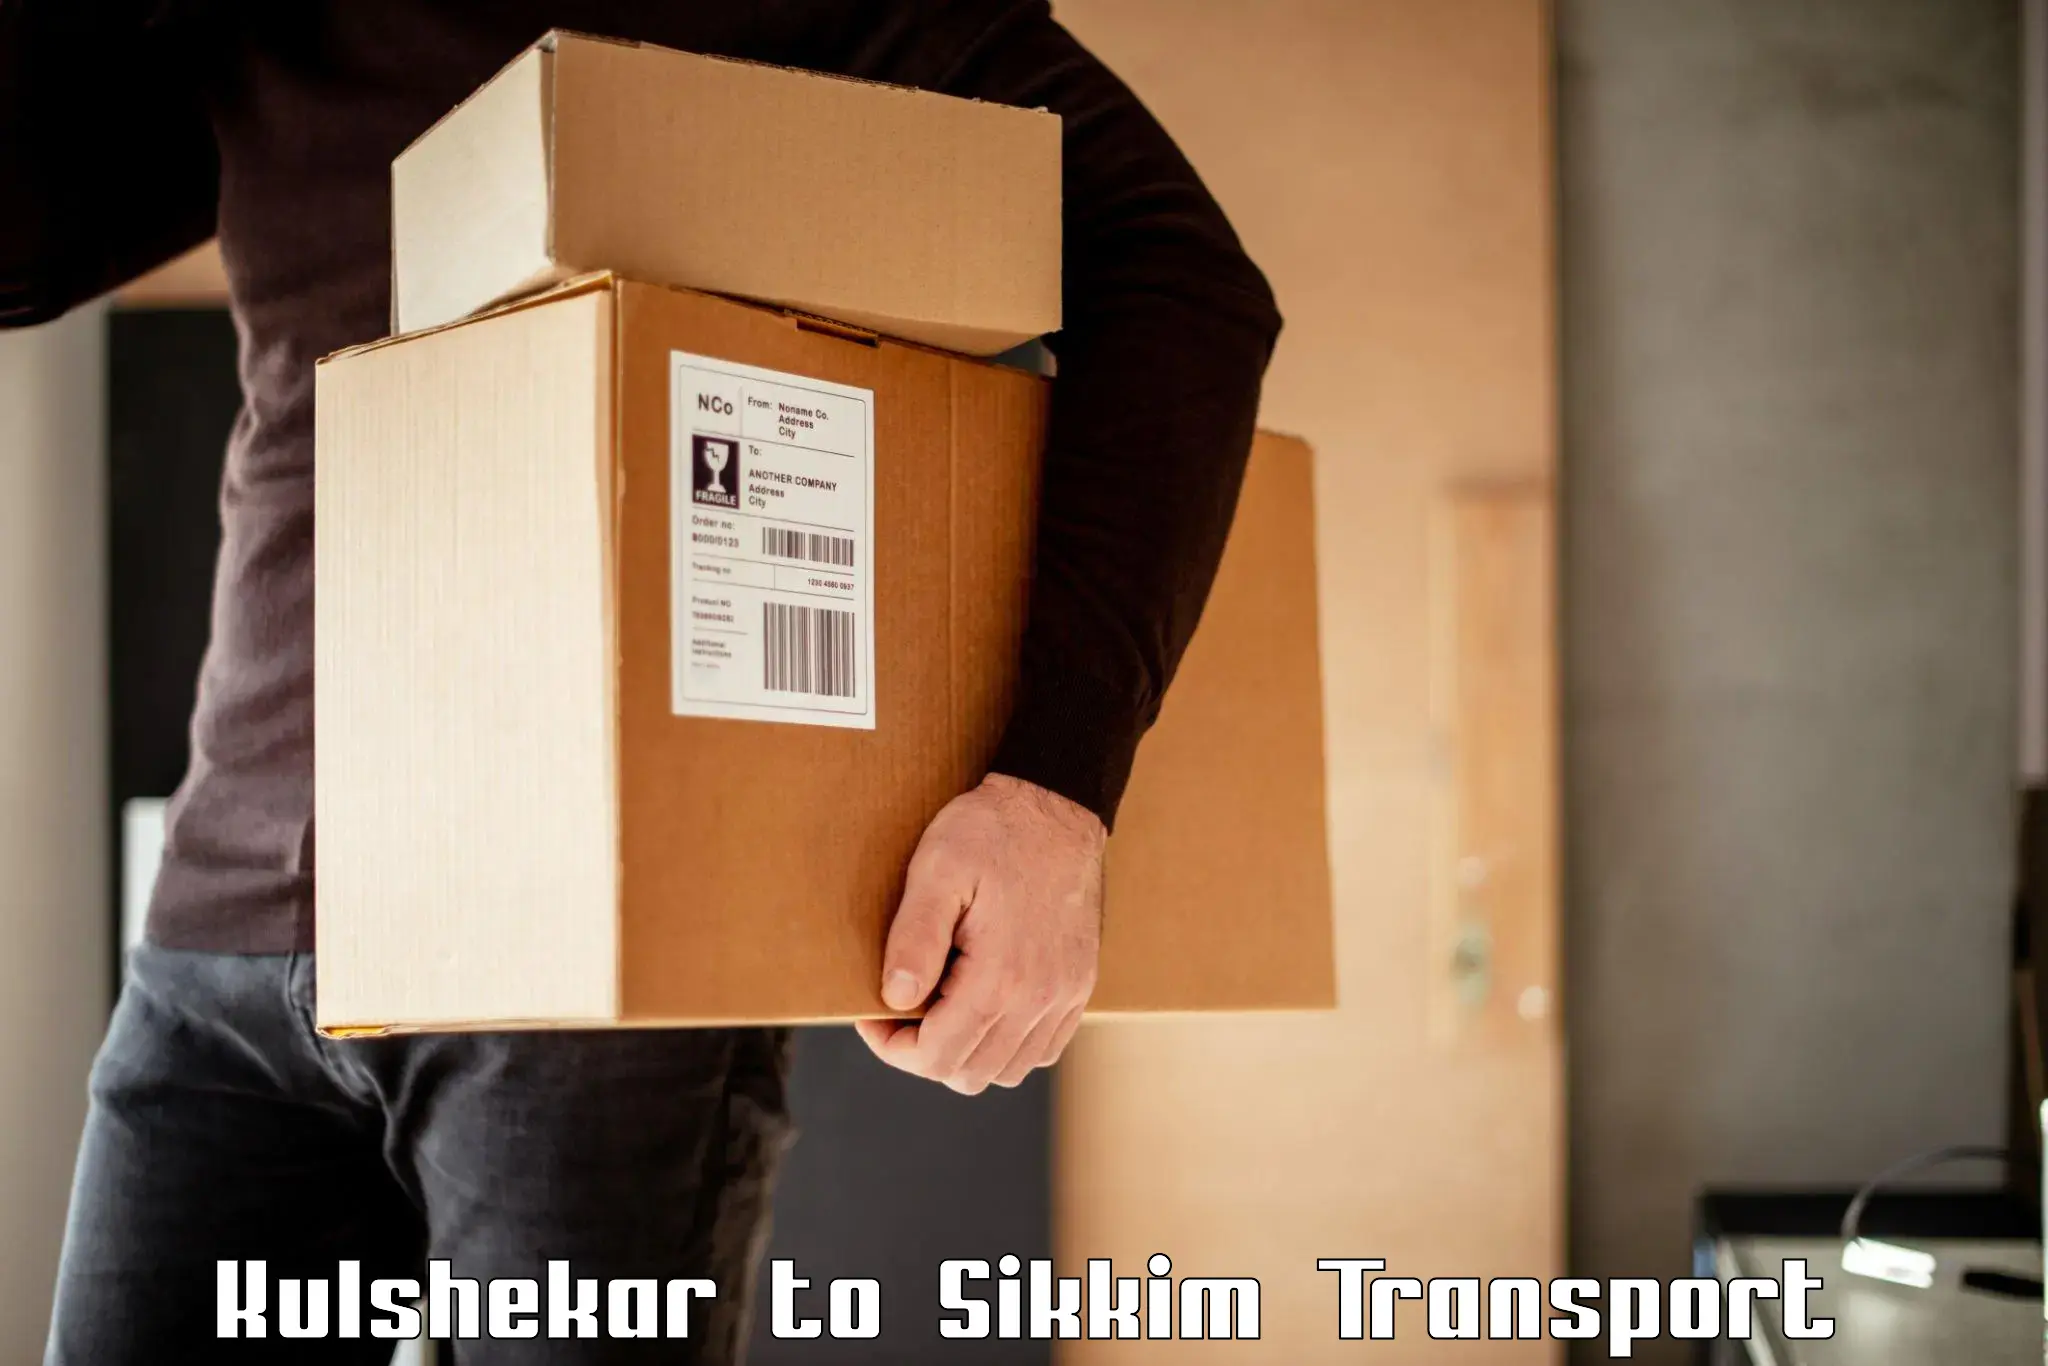 Container transport service Kulshekar to Sikkim